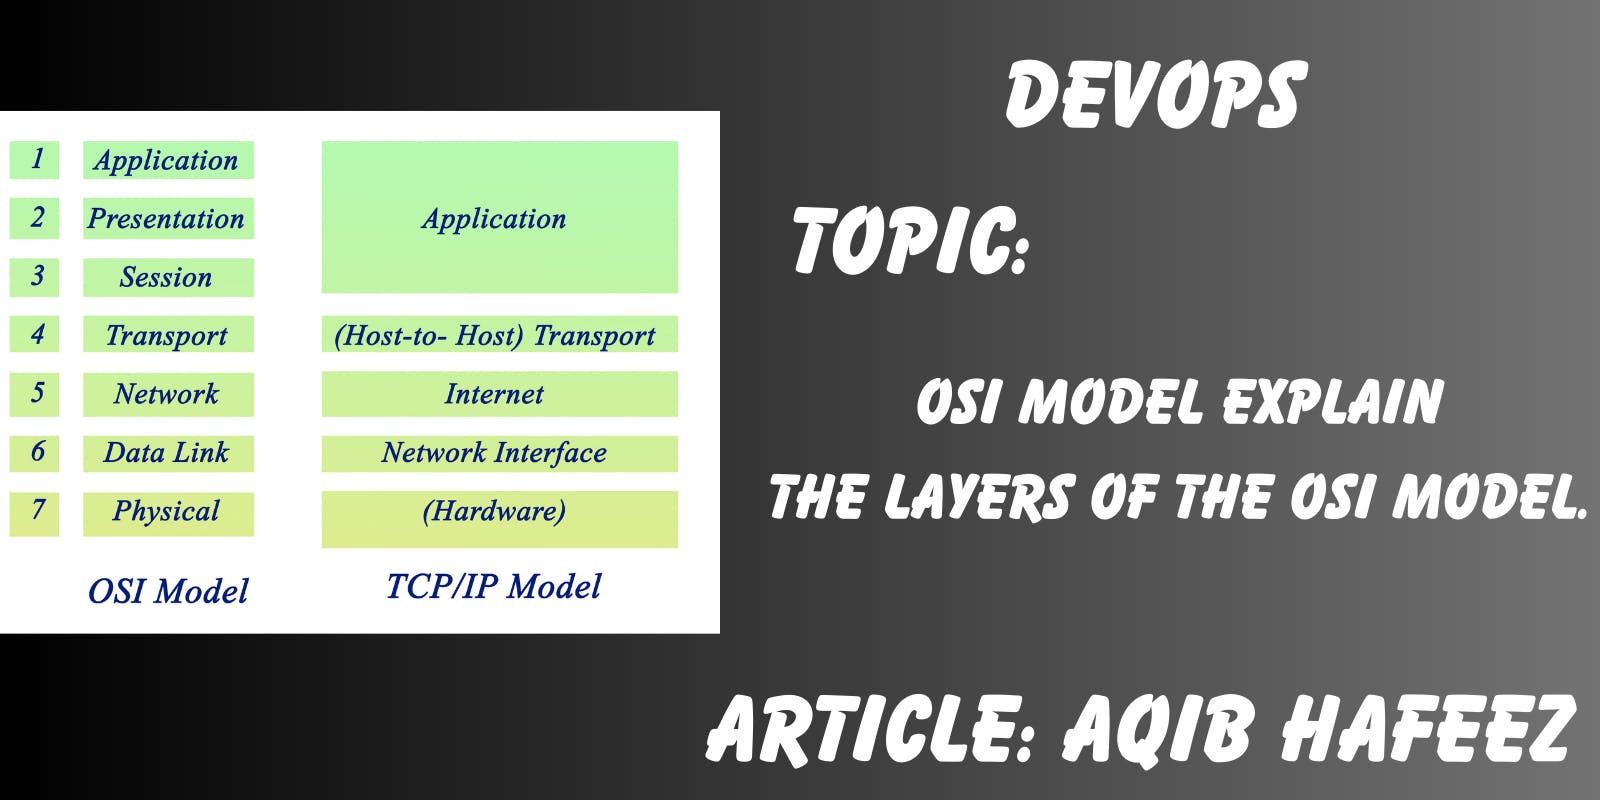 What is the OSI model explain the layers of the OSI model.